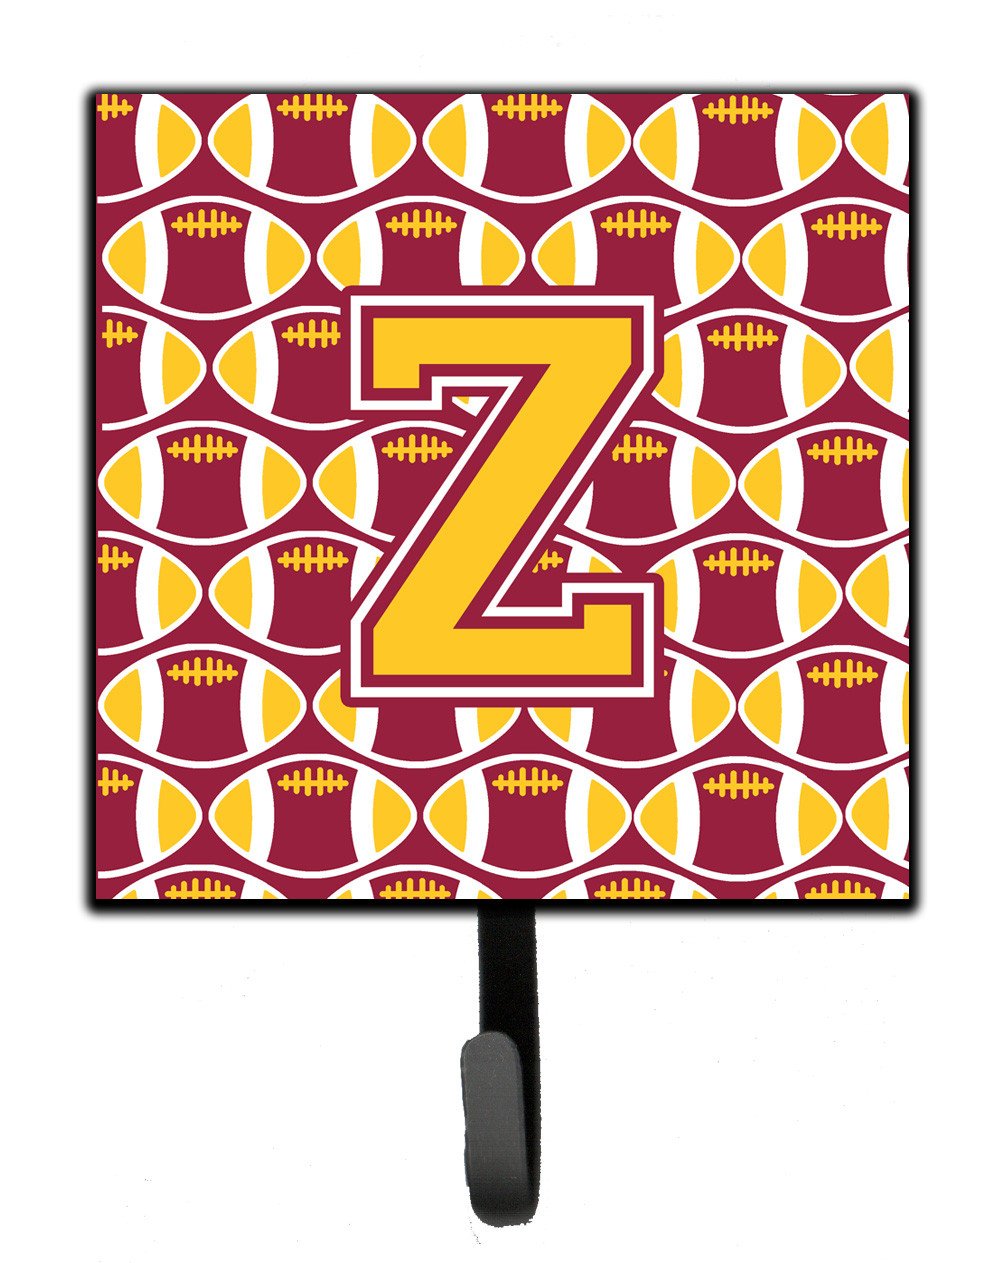 Letter Z Football Maroon and Gold Leash or Key Holder CJ1081-ZSH4 by Caroline's Treasures